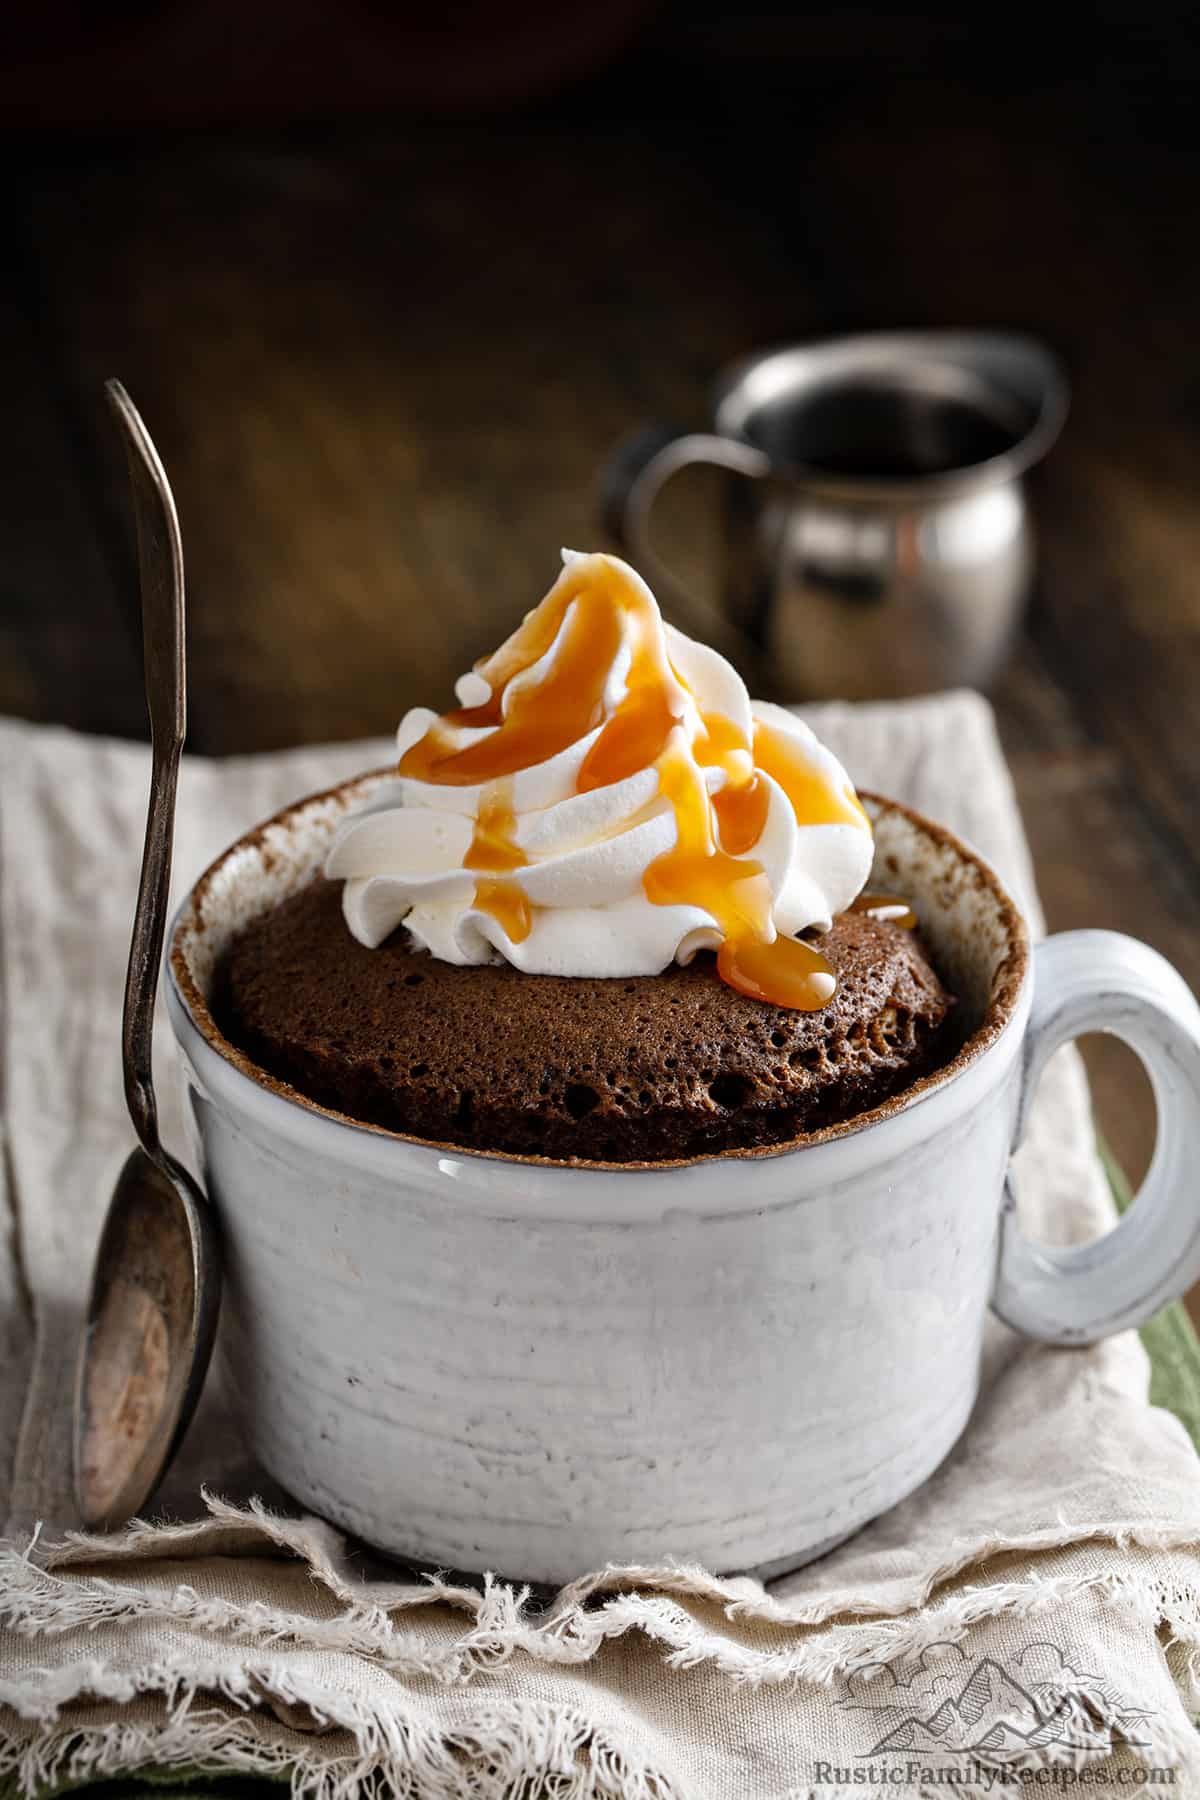 A nutella mug cake in a cup with whipped cream